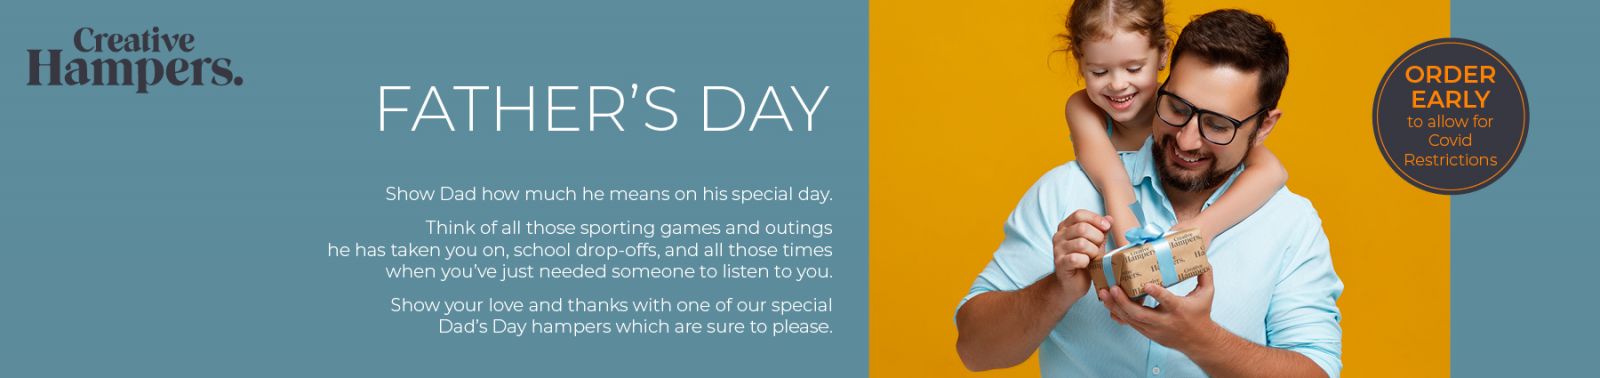 Fathers Day Hampers Banner